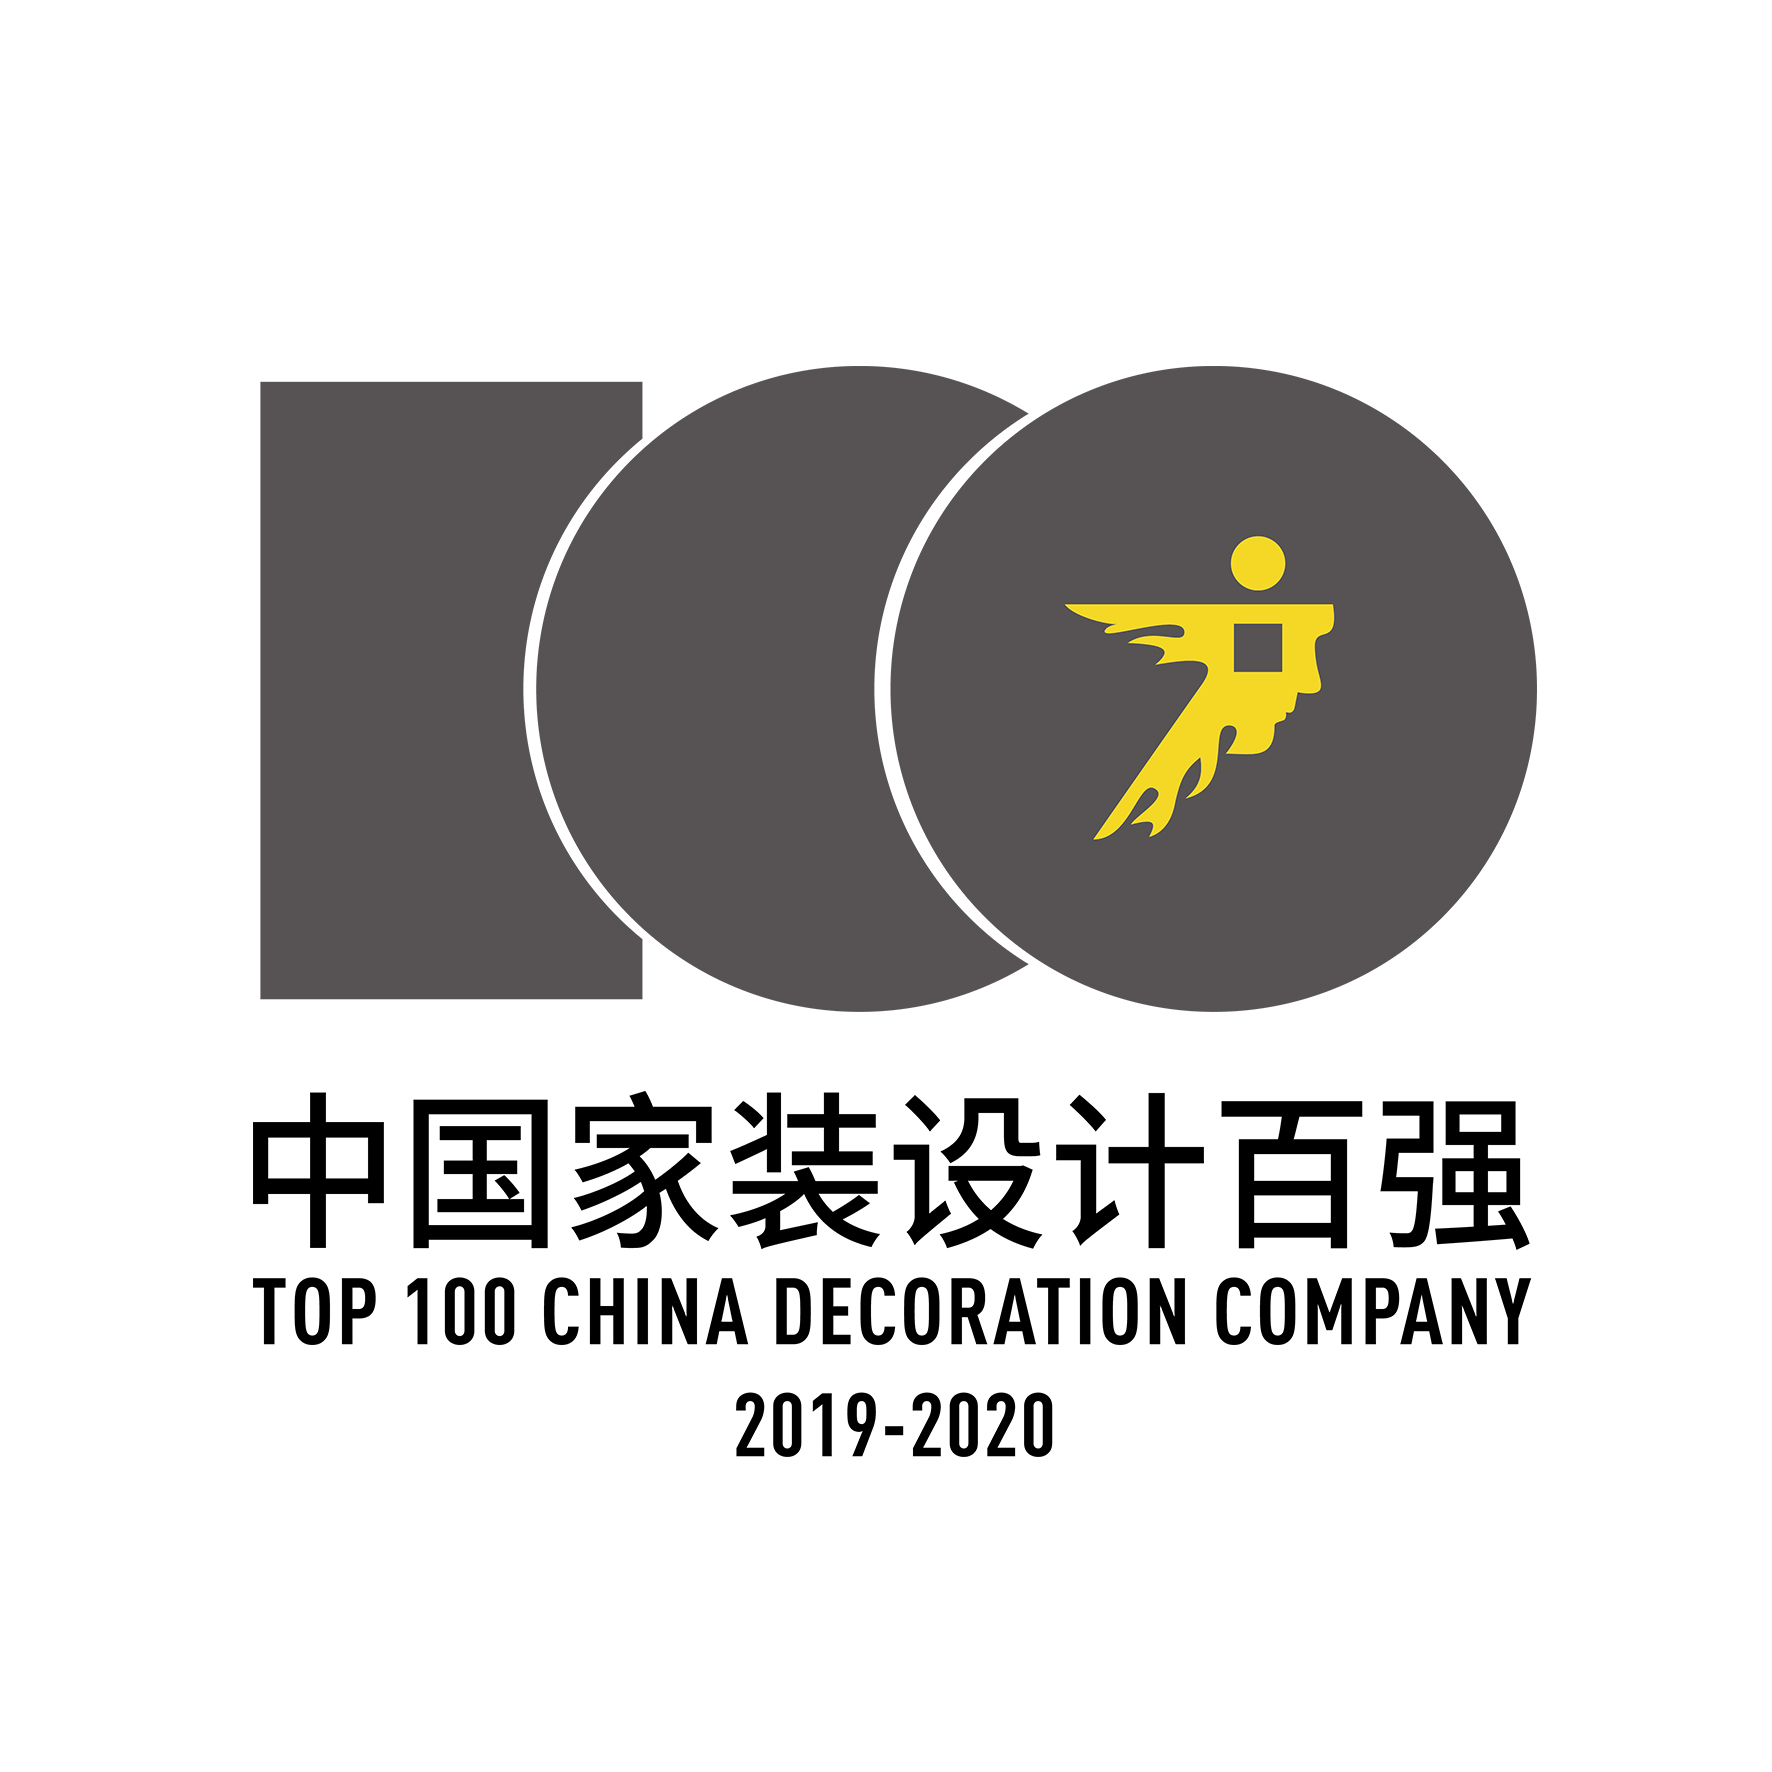 Top 100 China Decoration Company 2019-2020 –Top 100 Characters of Decoration Company in China